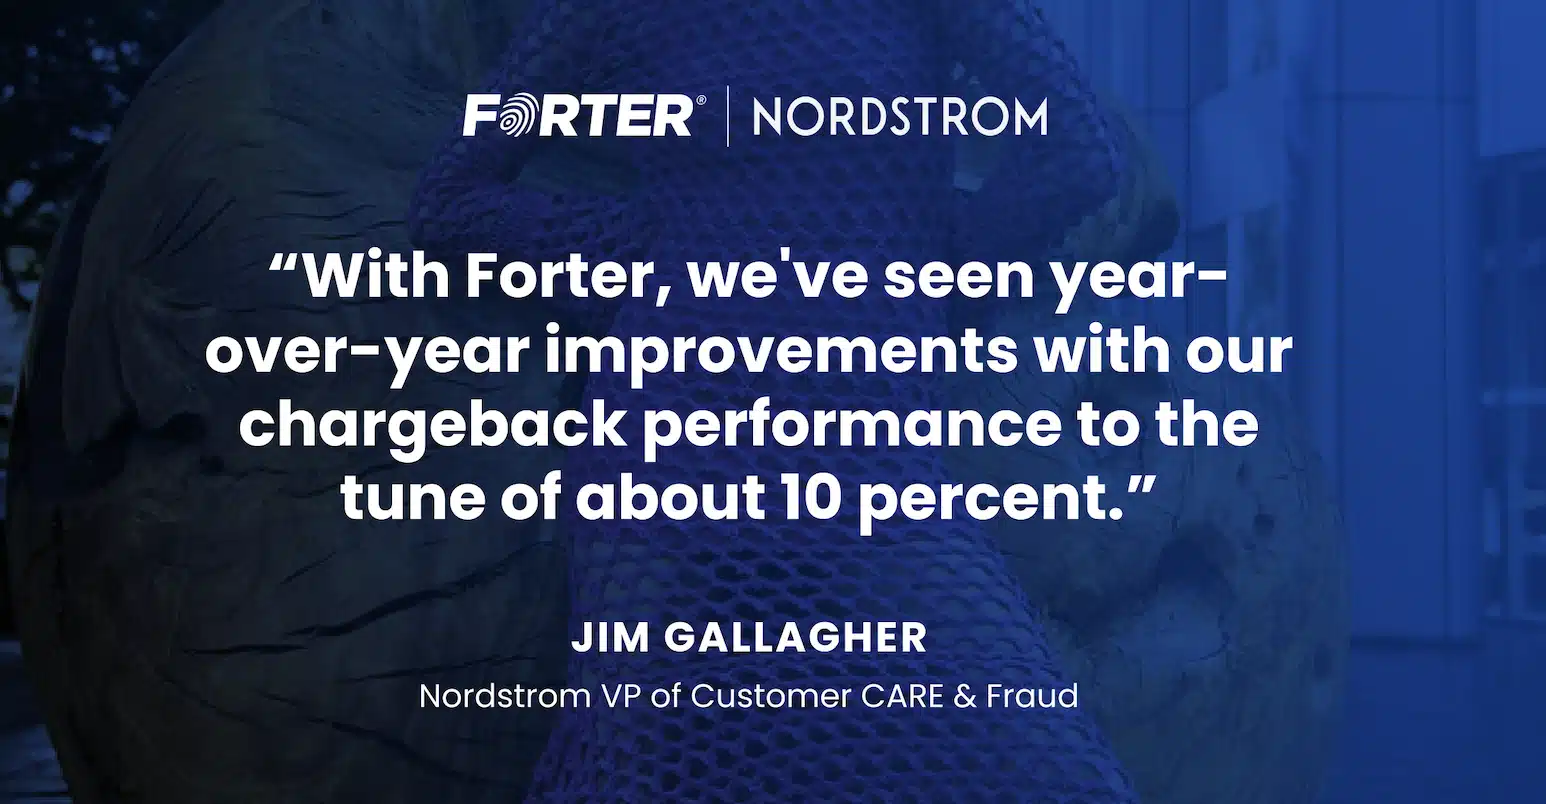 How Nordstrom Strikes the Right Balance Between Delighting Customers and Stopping Fraudsters